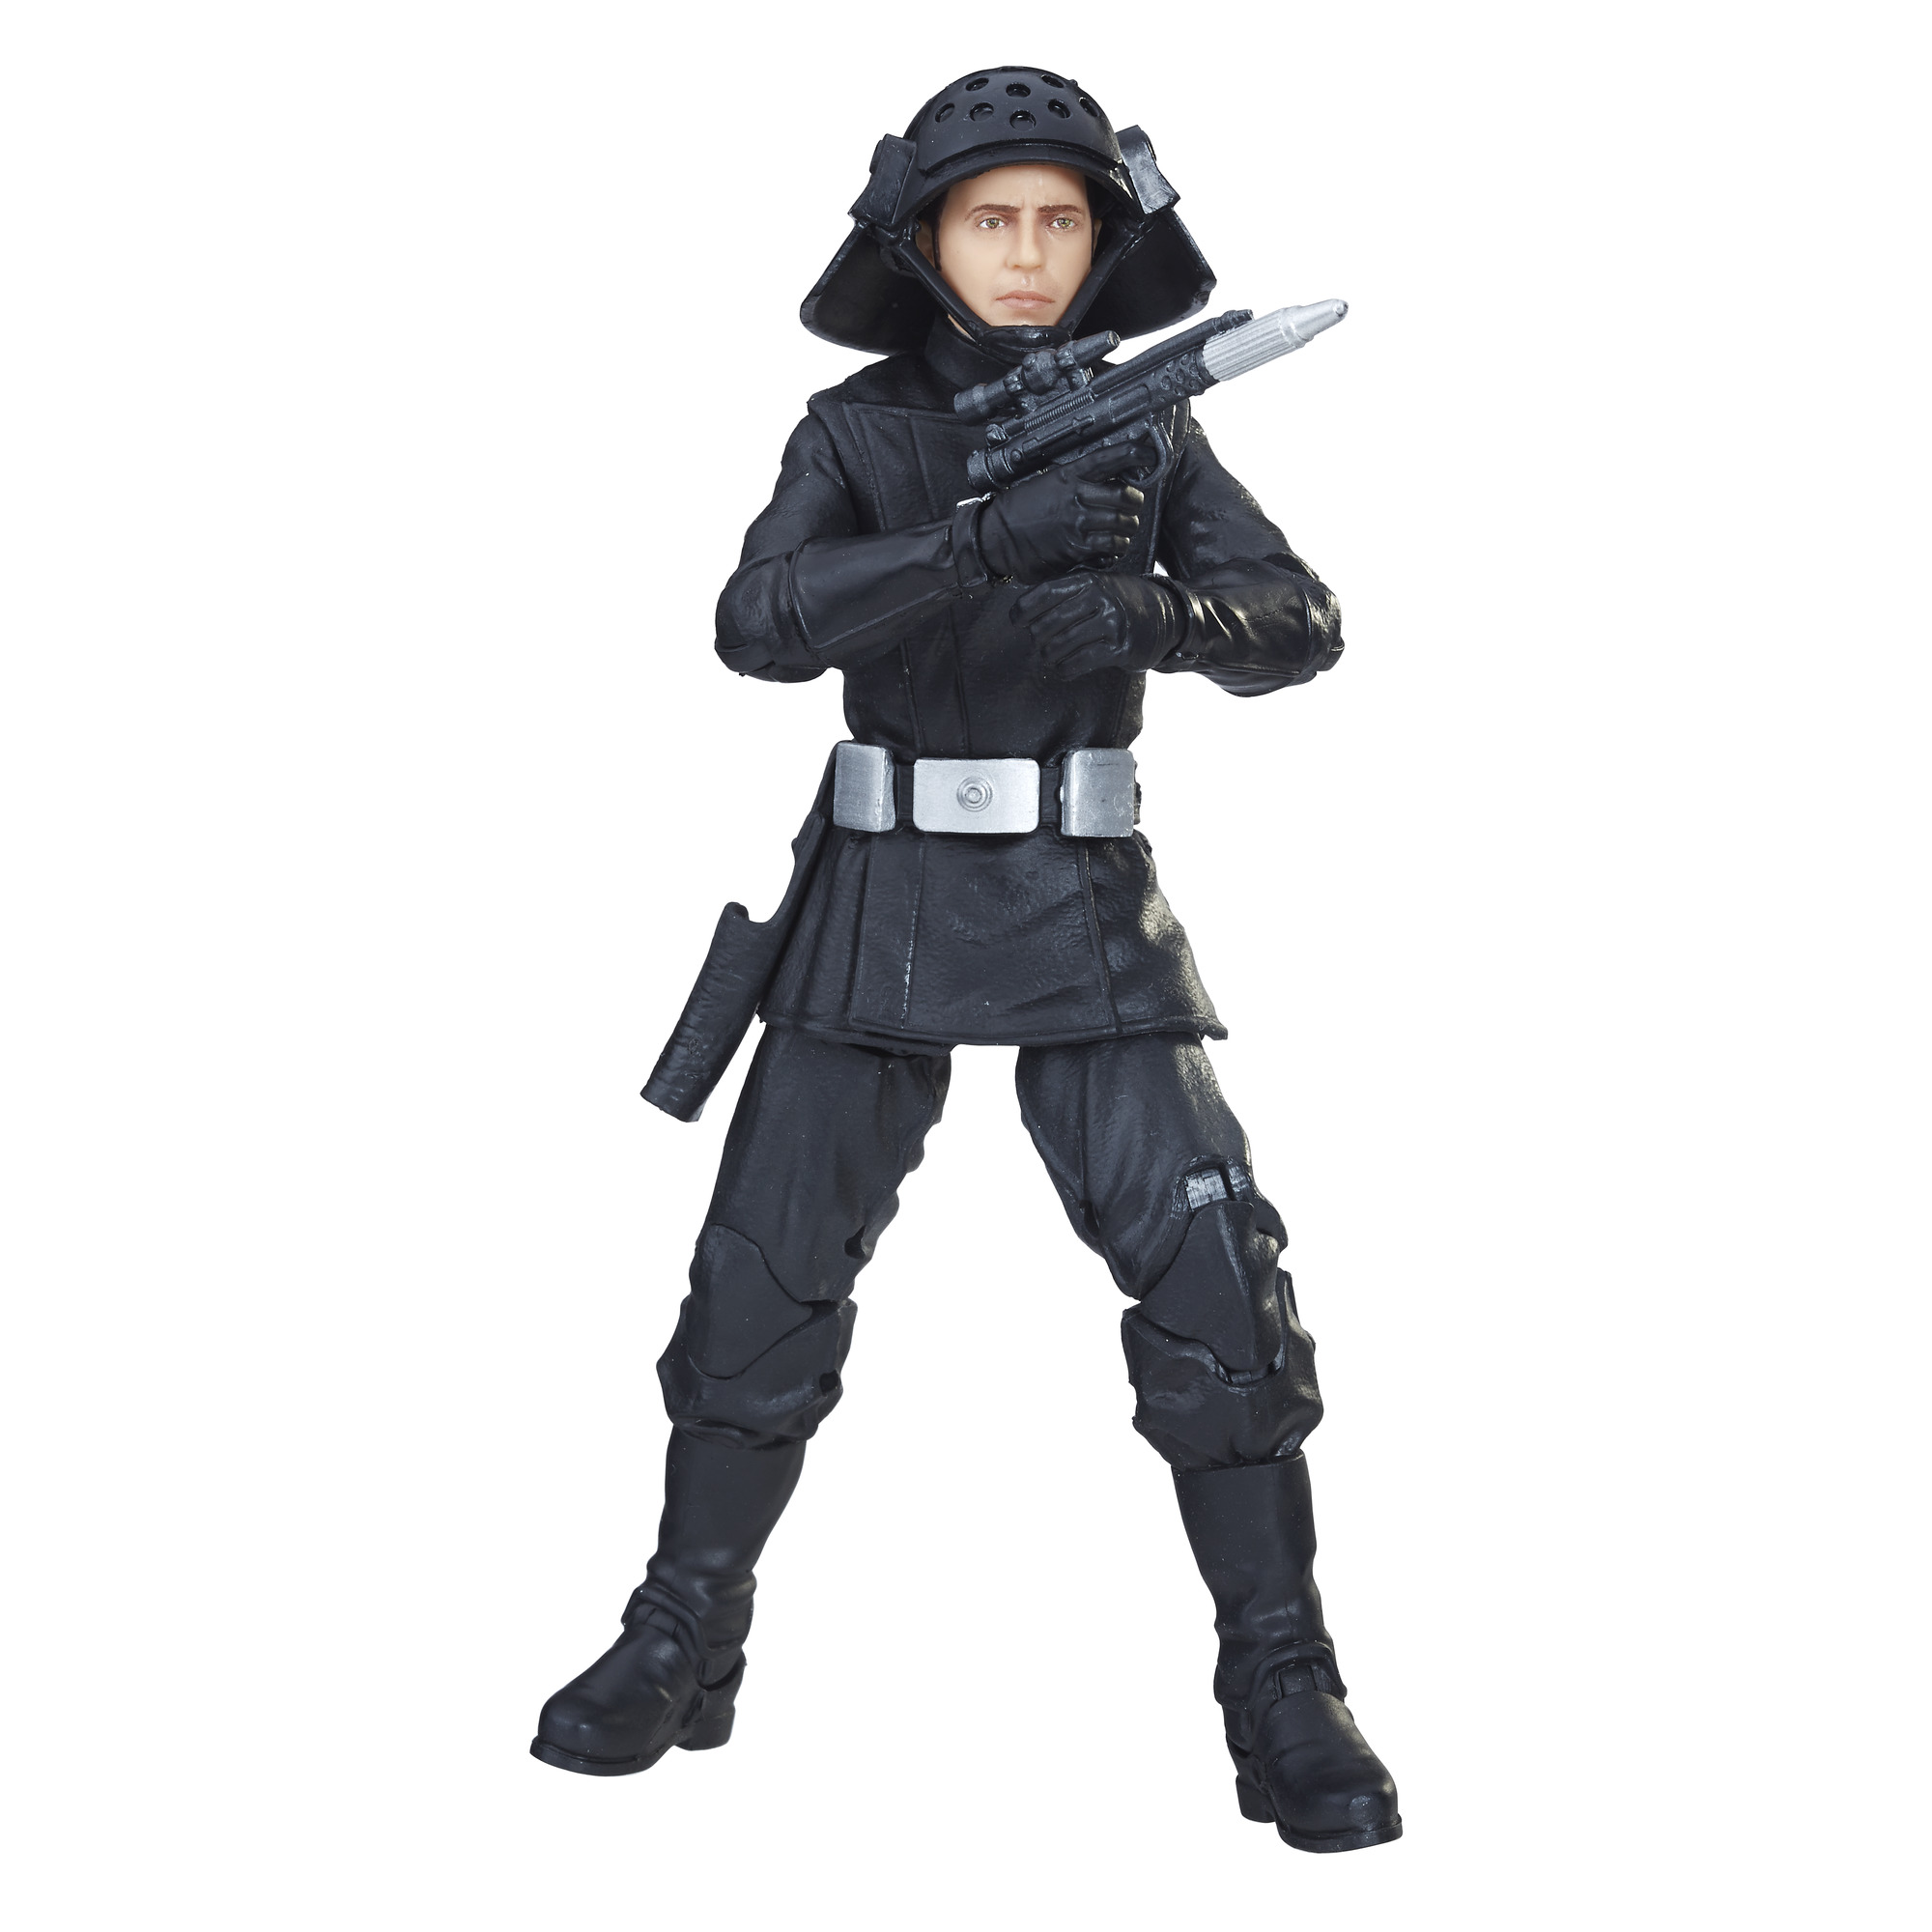 Star Wars The Black Series Death Squad Commander - image 3 of 3